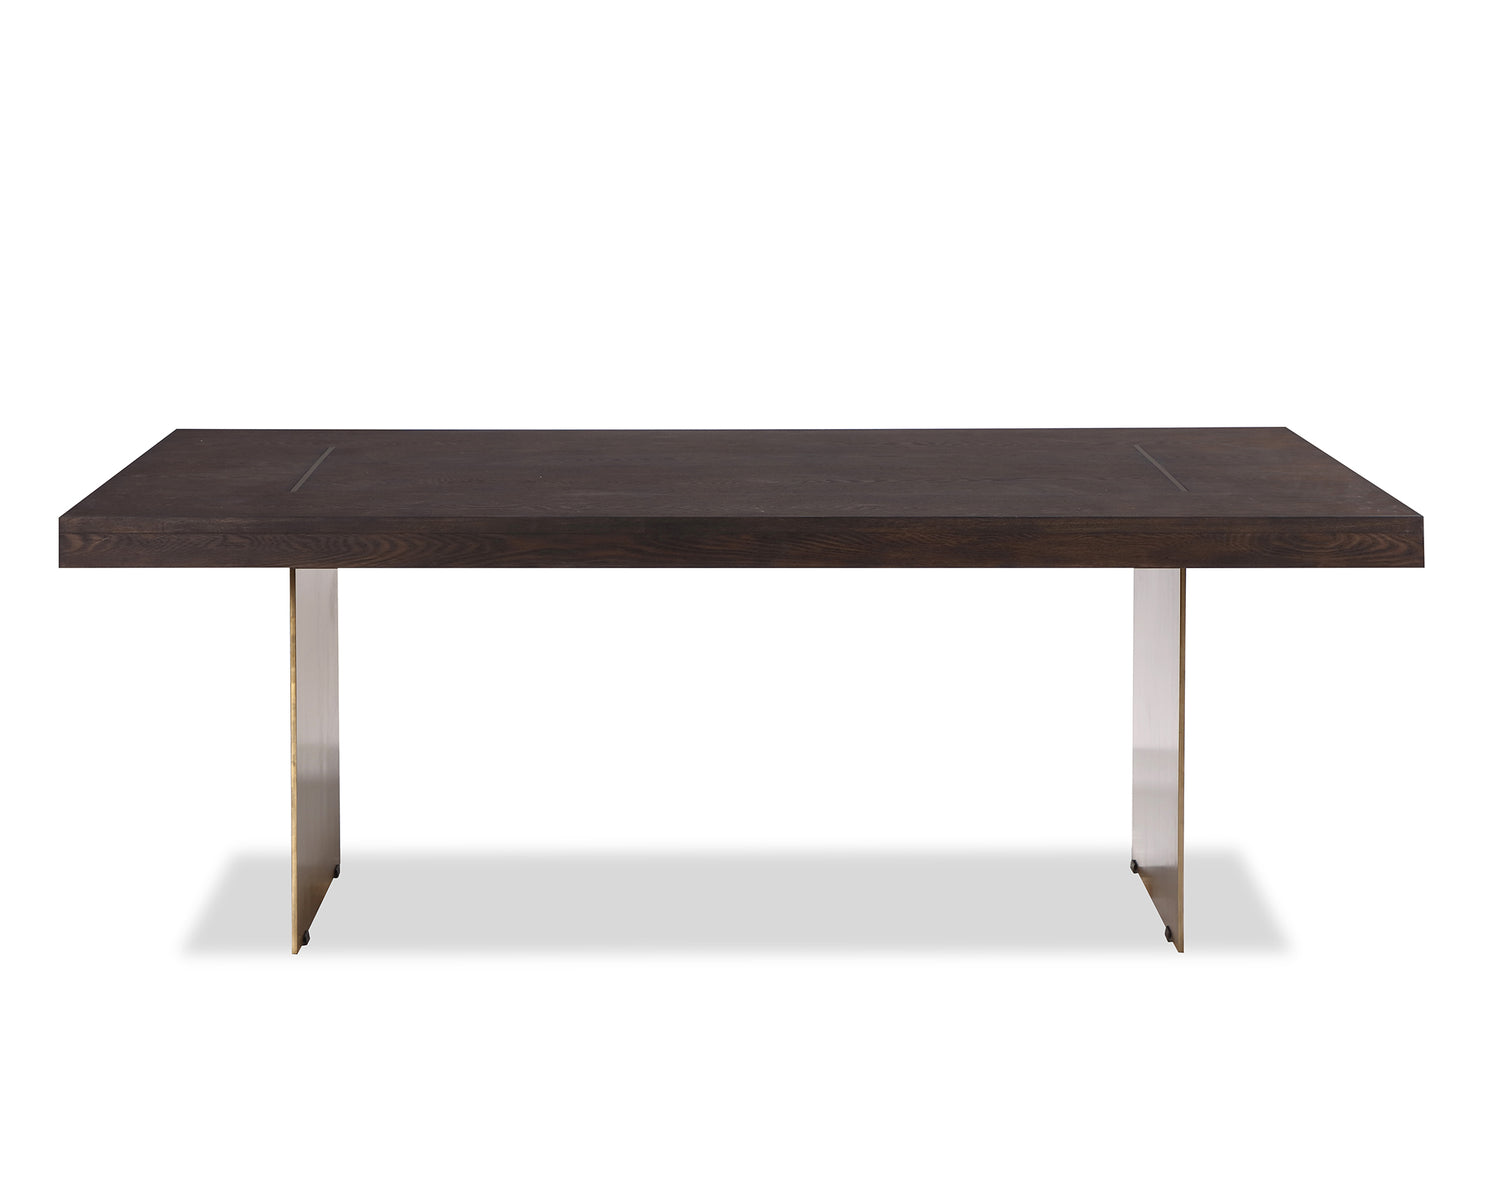  LiangAndEimil-Liang & Eimil Unma Dining Table Dark Brown- 45 